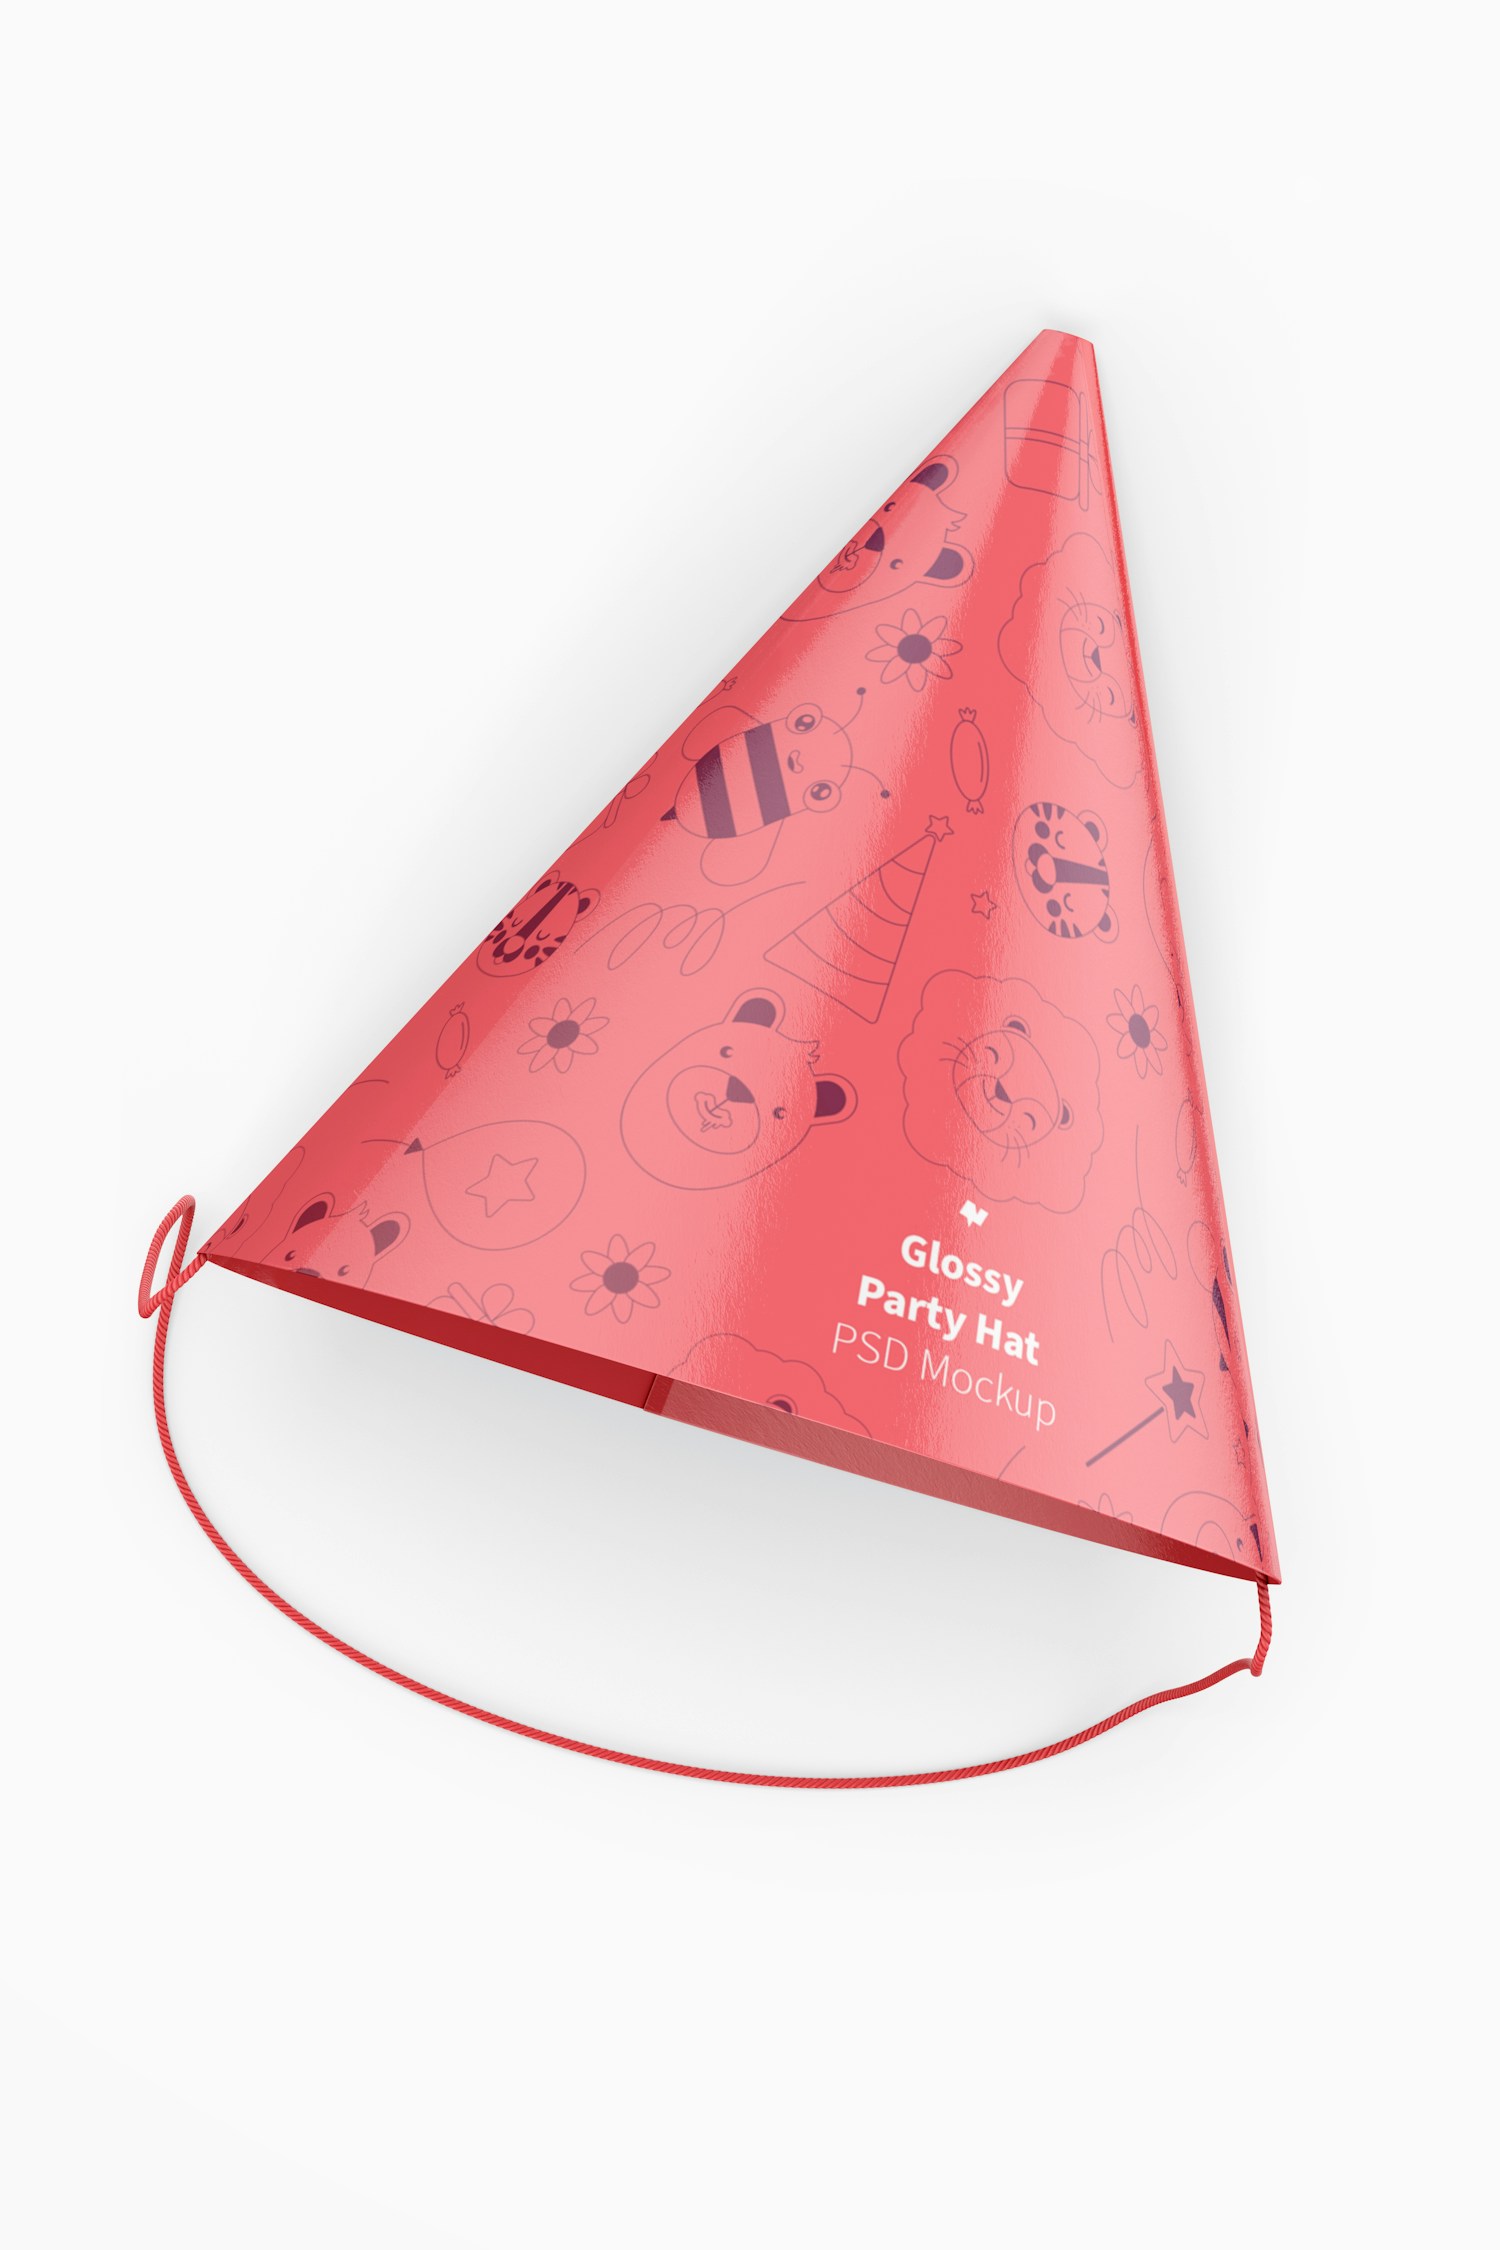 Glossy Party Hat Mockup